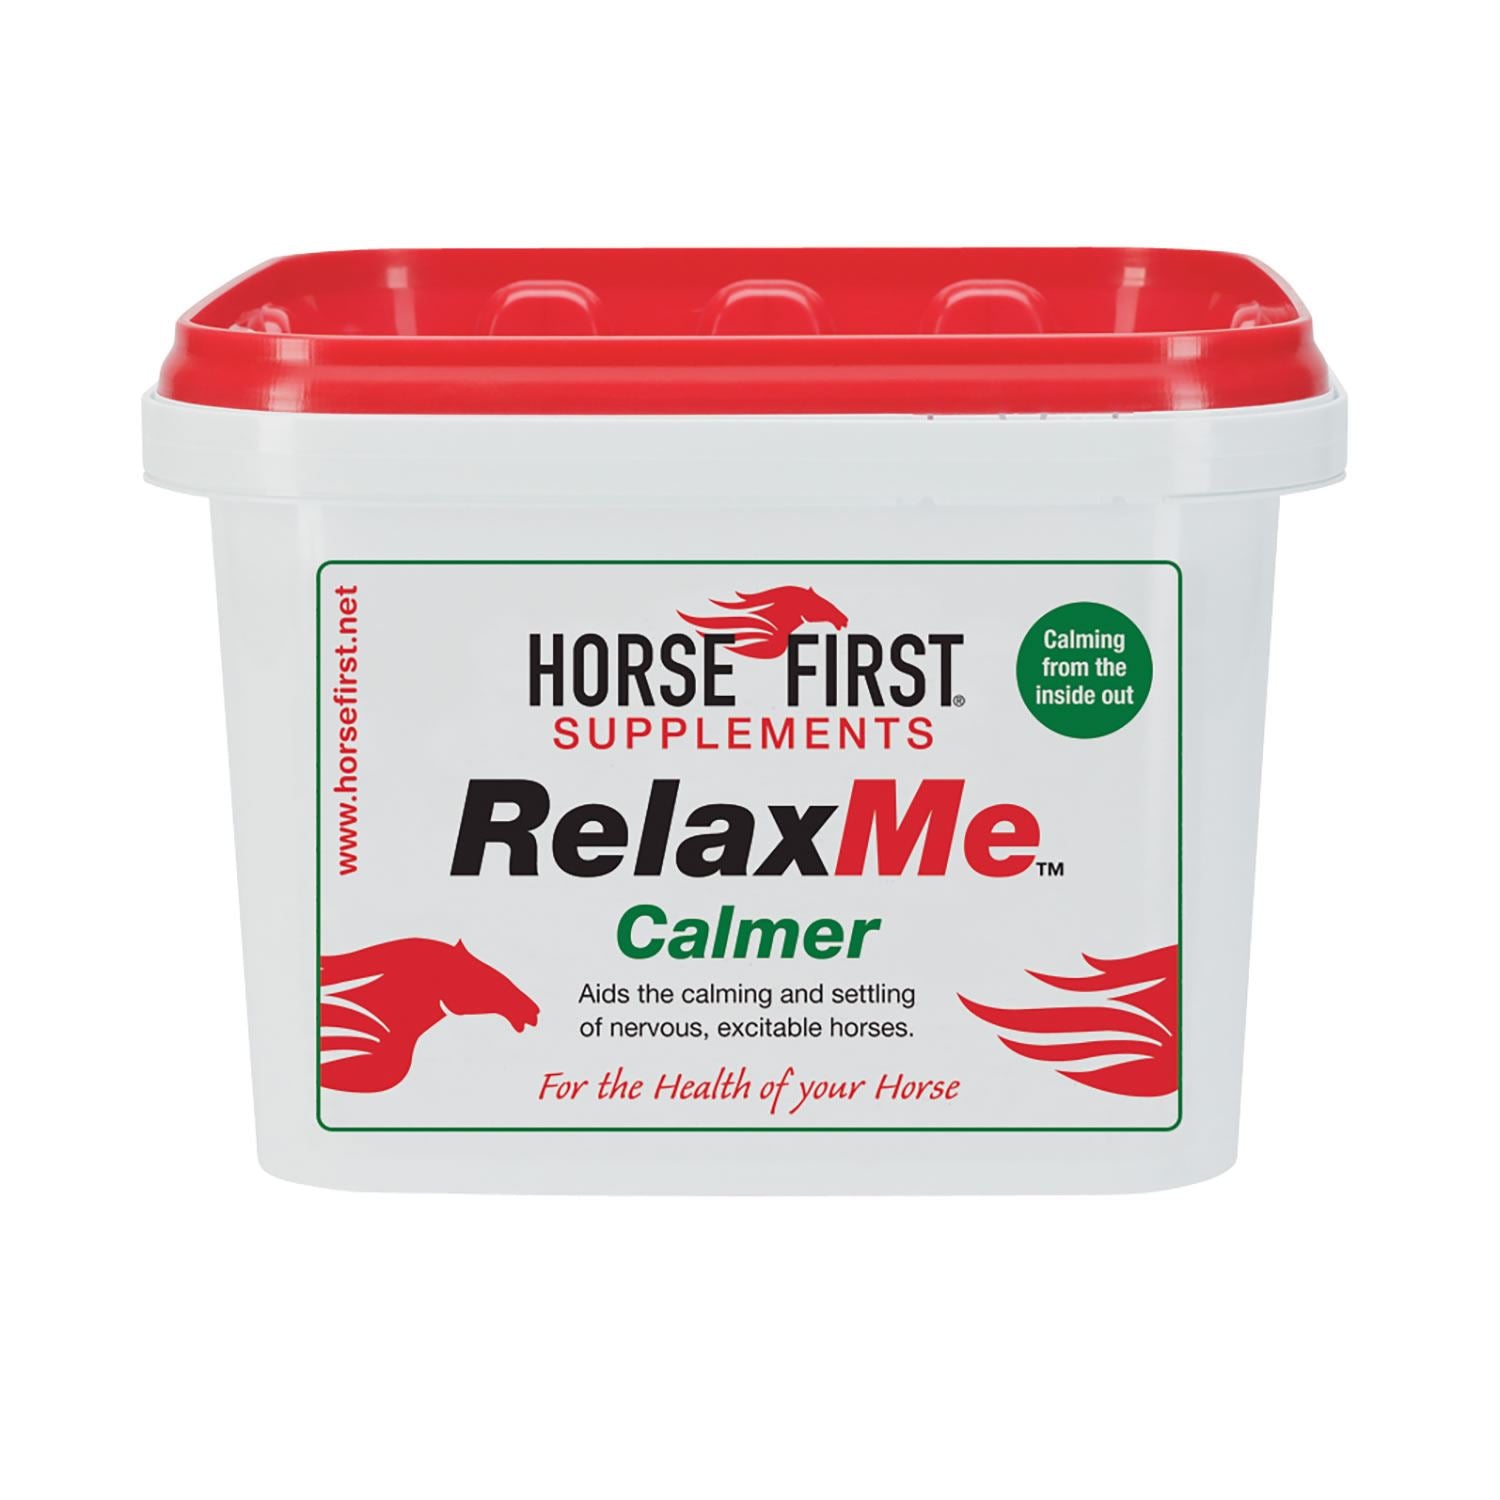 HORSE FIRST RELAX ME, a unique double-action formula for both gut and nervous system health